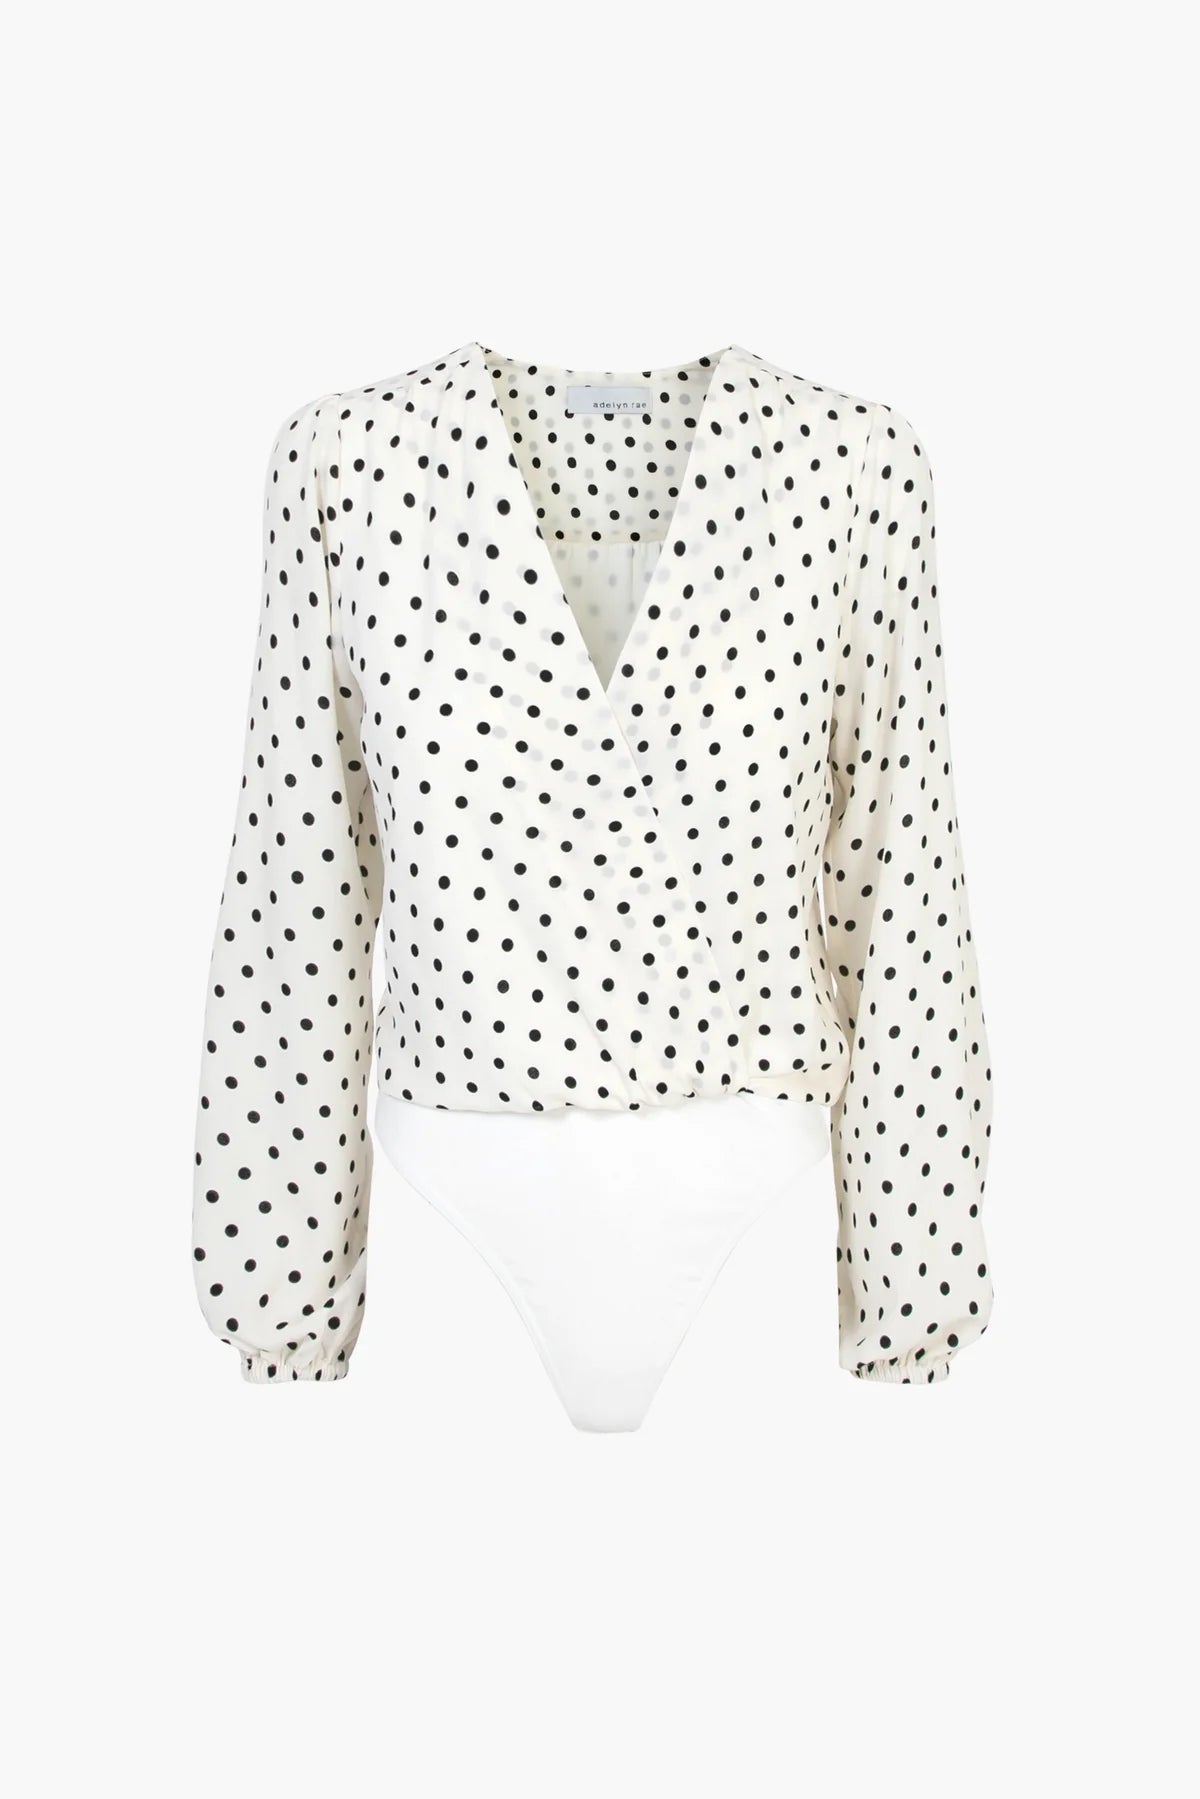 Adelyn Rae Afterhour bodysuit with a deep v-neckline and long sleeves, featuring a classic black polka dot print on a white background